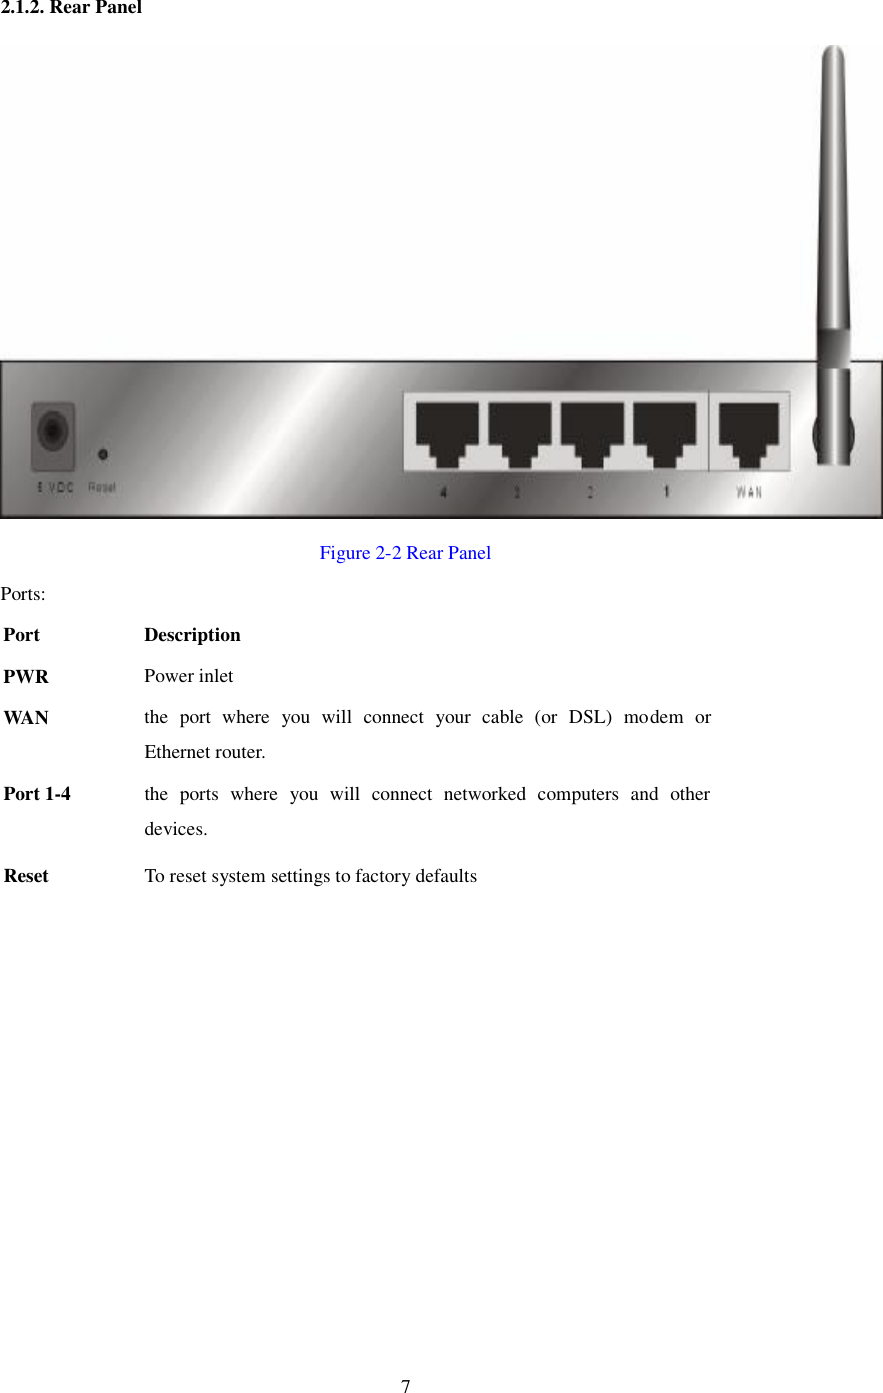  7 2.1.2. Rear Panel  Figure 2-2 Rear Panel Ports: Port Description PWR  Power inlet WAN  the port where you will connect your cable (or DSL) modem or Ethernet router. Port 1-4 the ports where you will connect networked computers and other devices. Reset  To reset system settings to factory defaults   